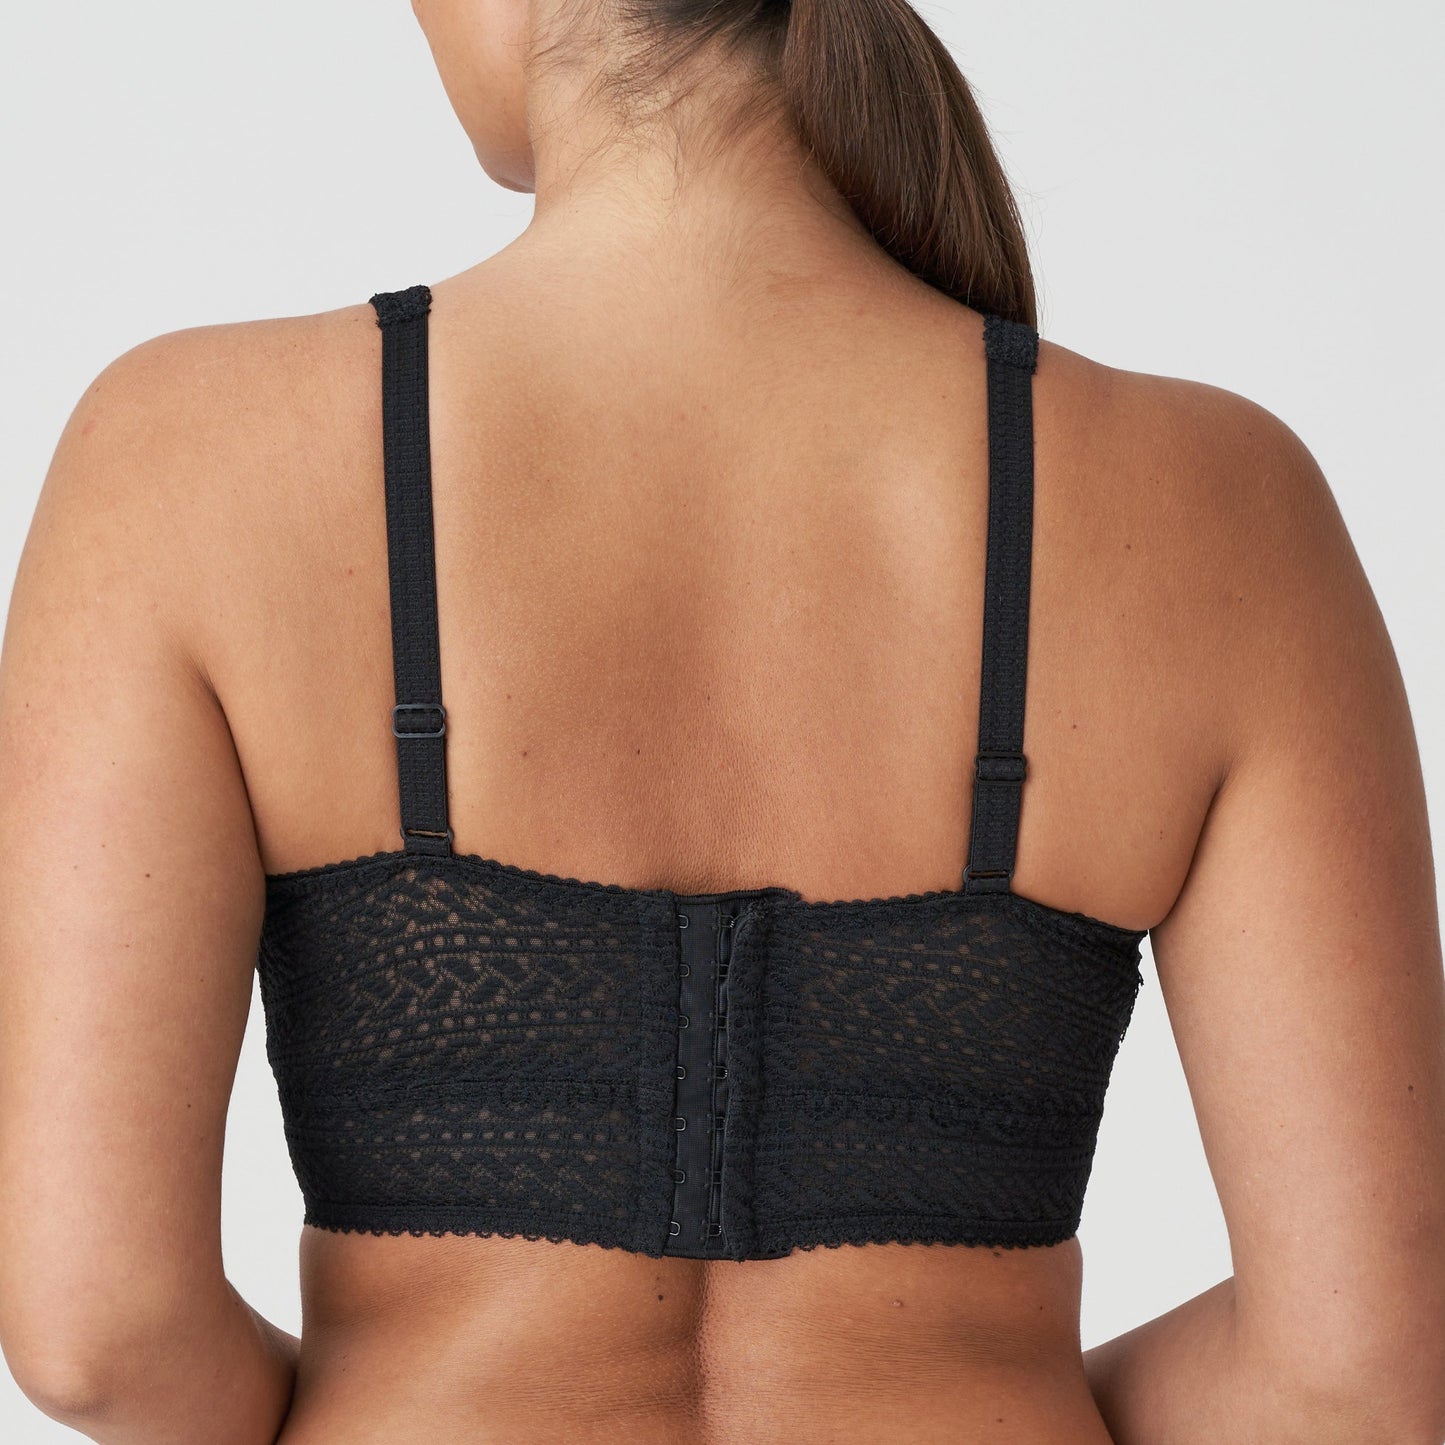 Back view of a woman wearing the Montara DD+ wireless longline full support bralette in black lace by PrimaDonna.